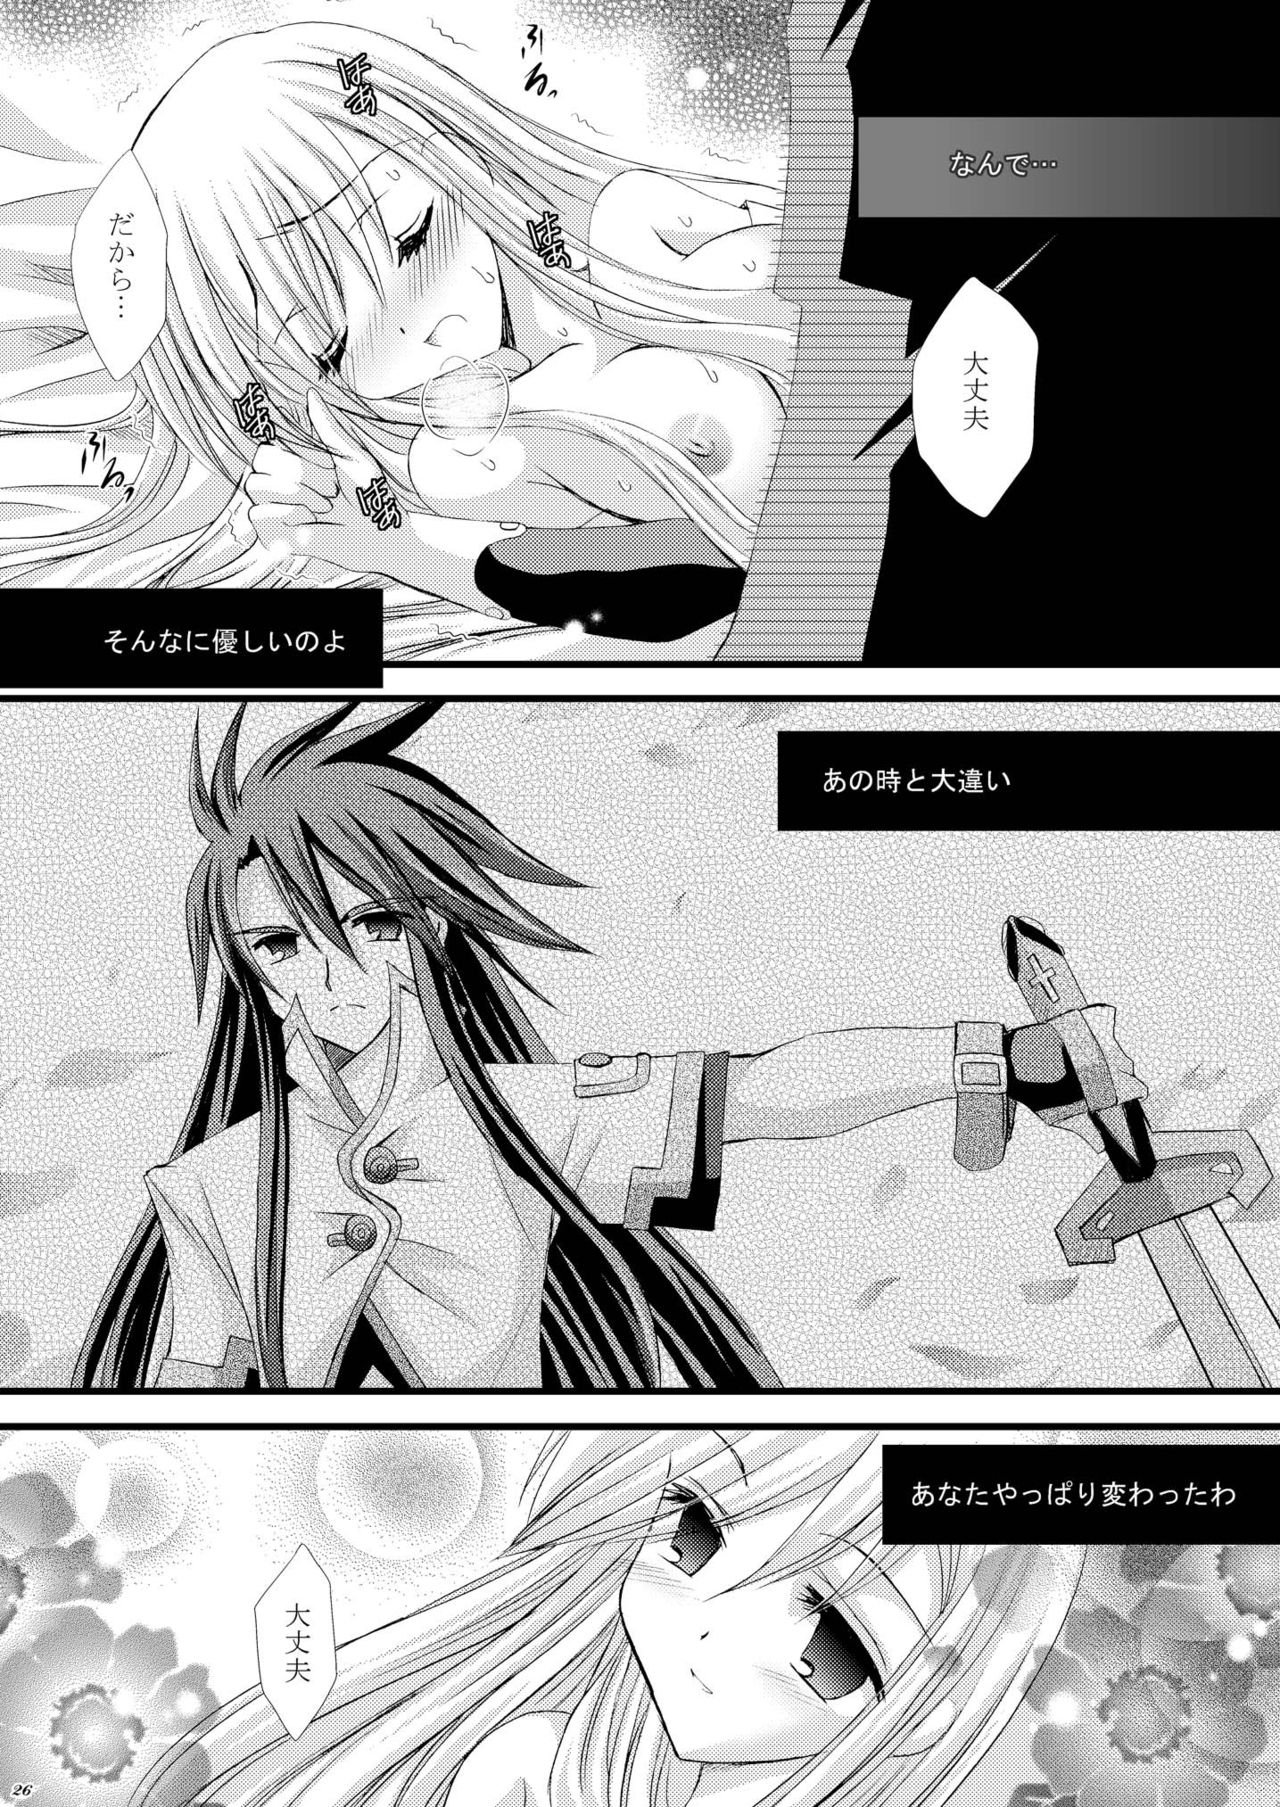 [ARC (Tamagawa Yukimaru)] Recollection (Tales of the Abyss) [Digital] page 27 full